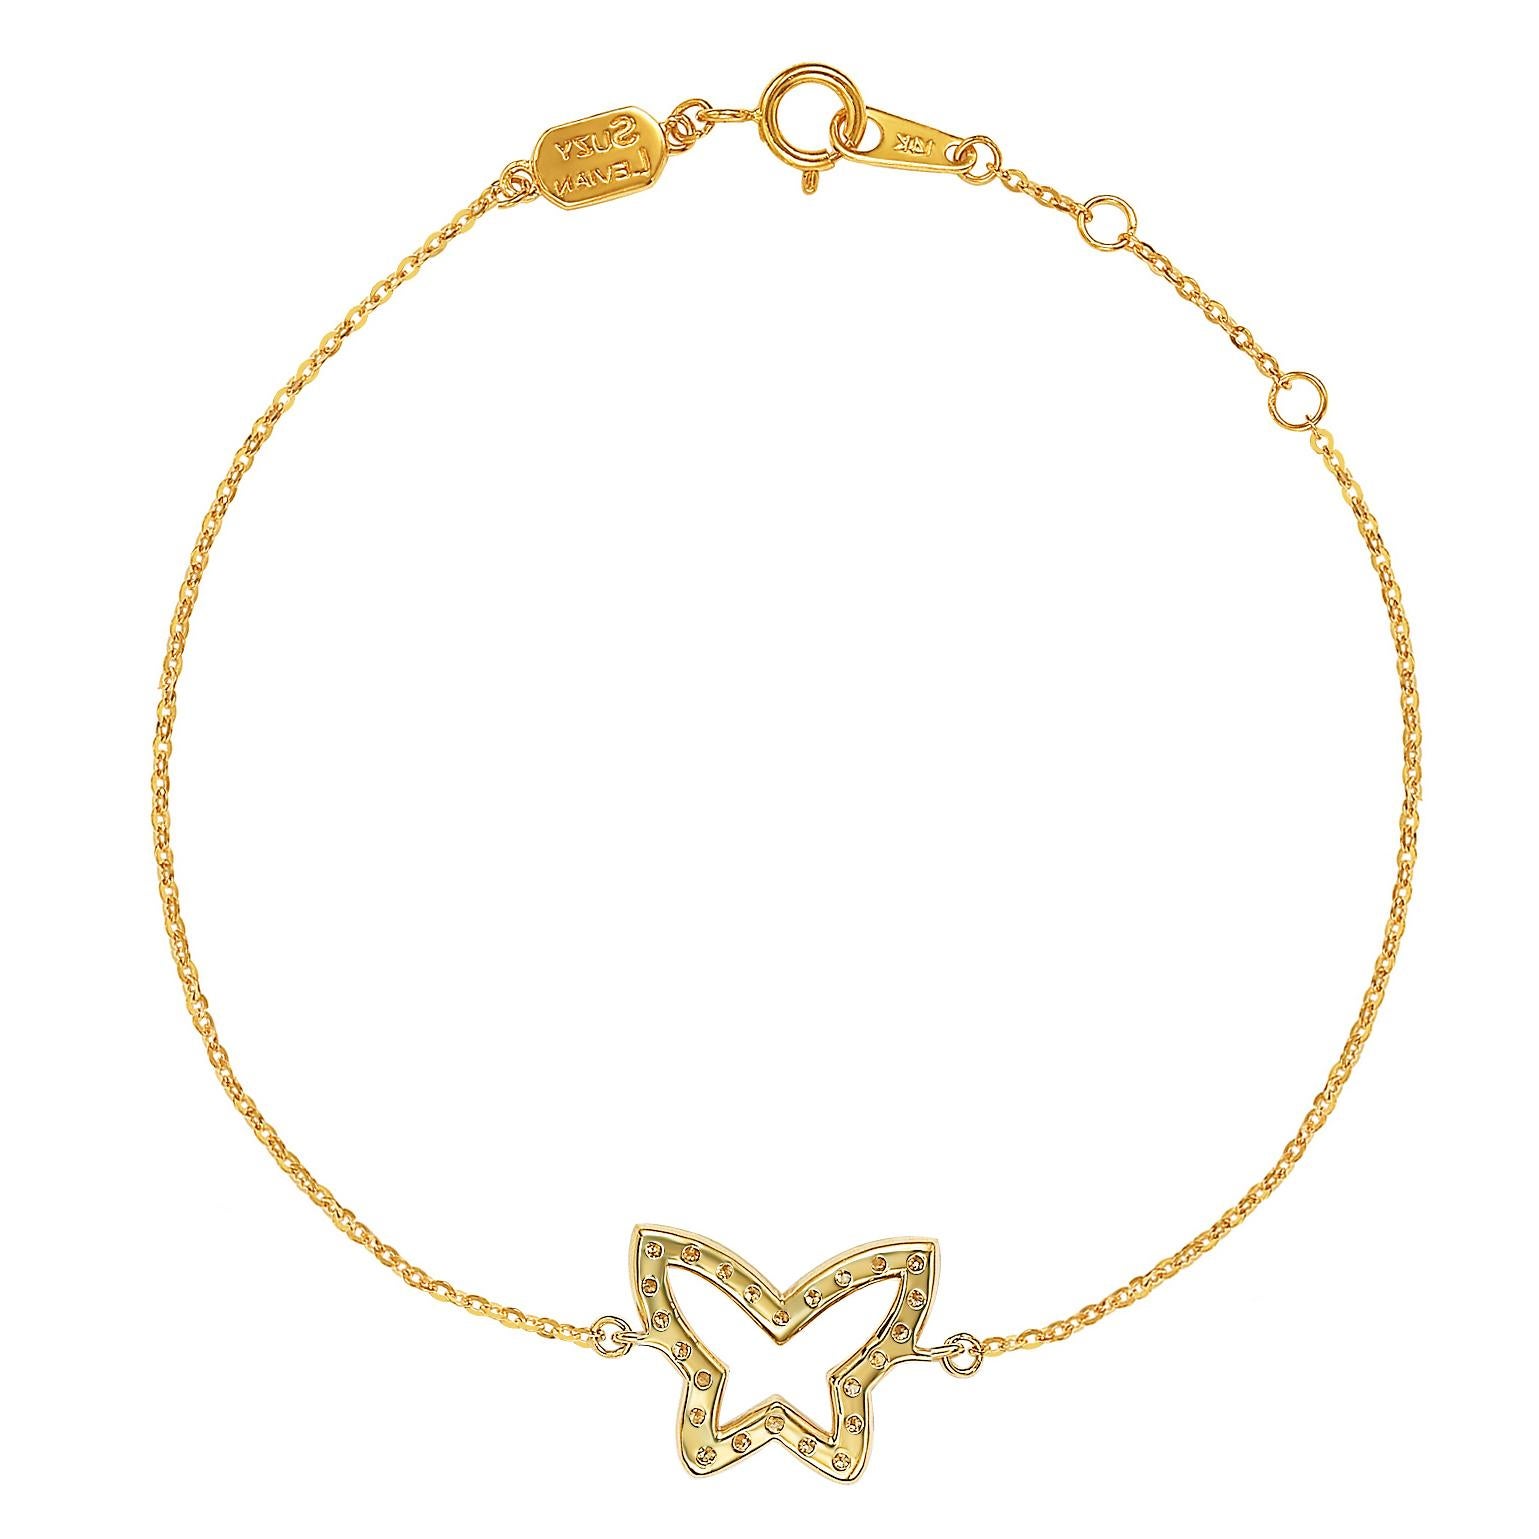 This elegant Suzy Levian butterfly solitaire bracelet features 24 diamonds, which are 1.4 mm size totals .30 cttw, all set in 14K yellow gold setting. Each diamond butterfly is attached to a chain that is secured with a spring ring closure with a